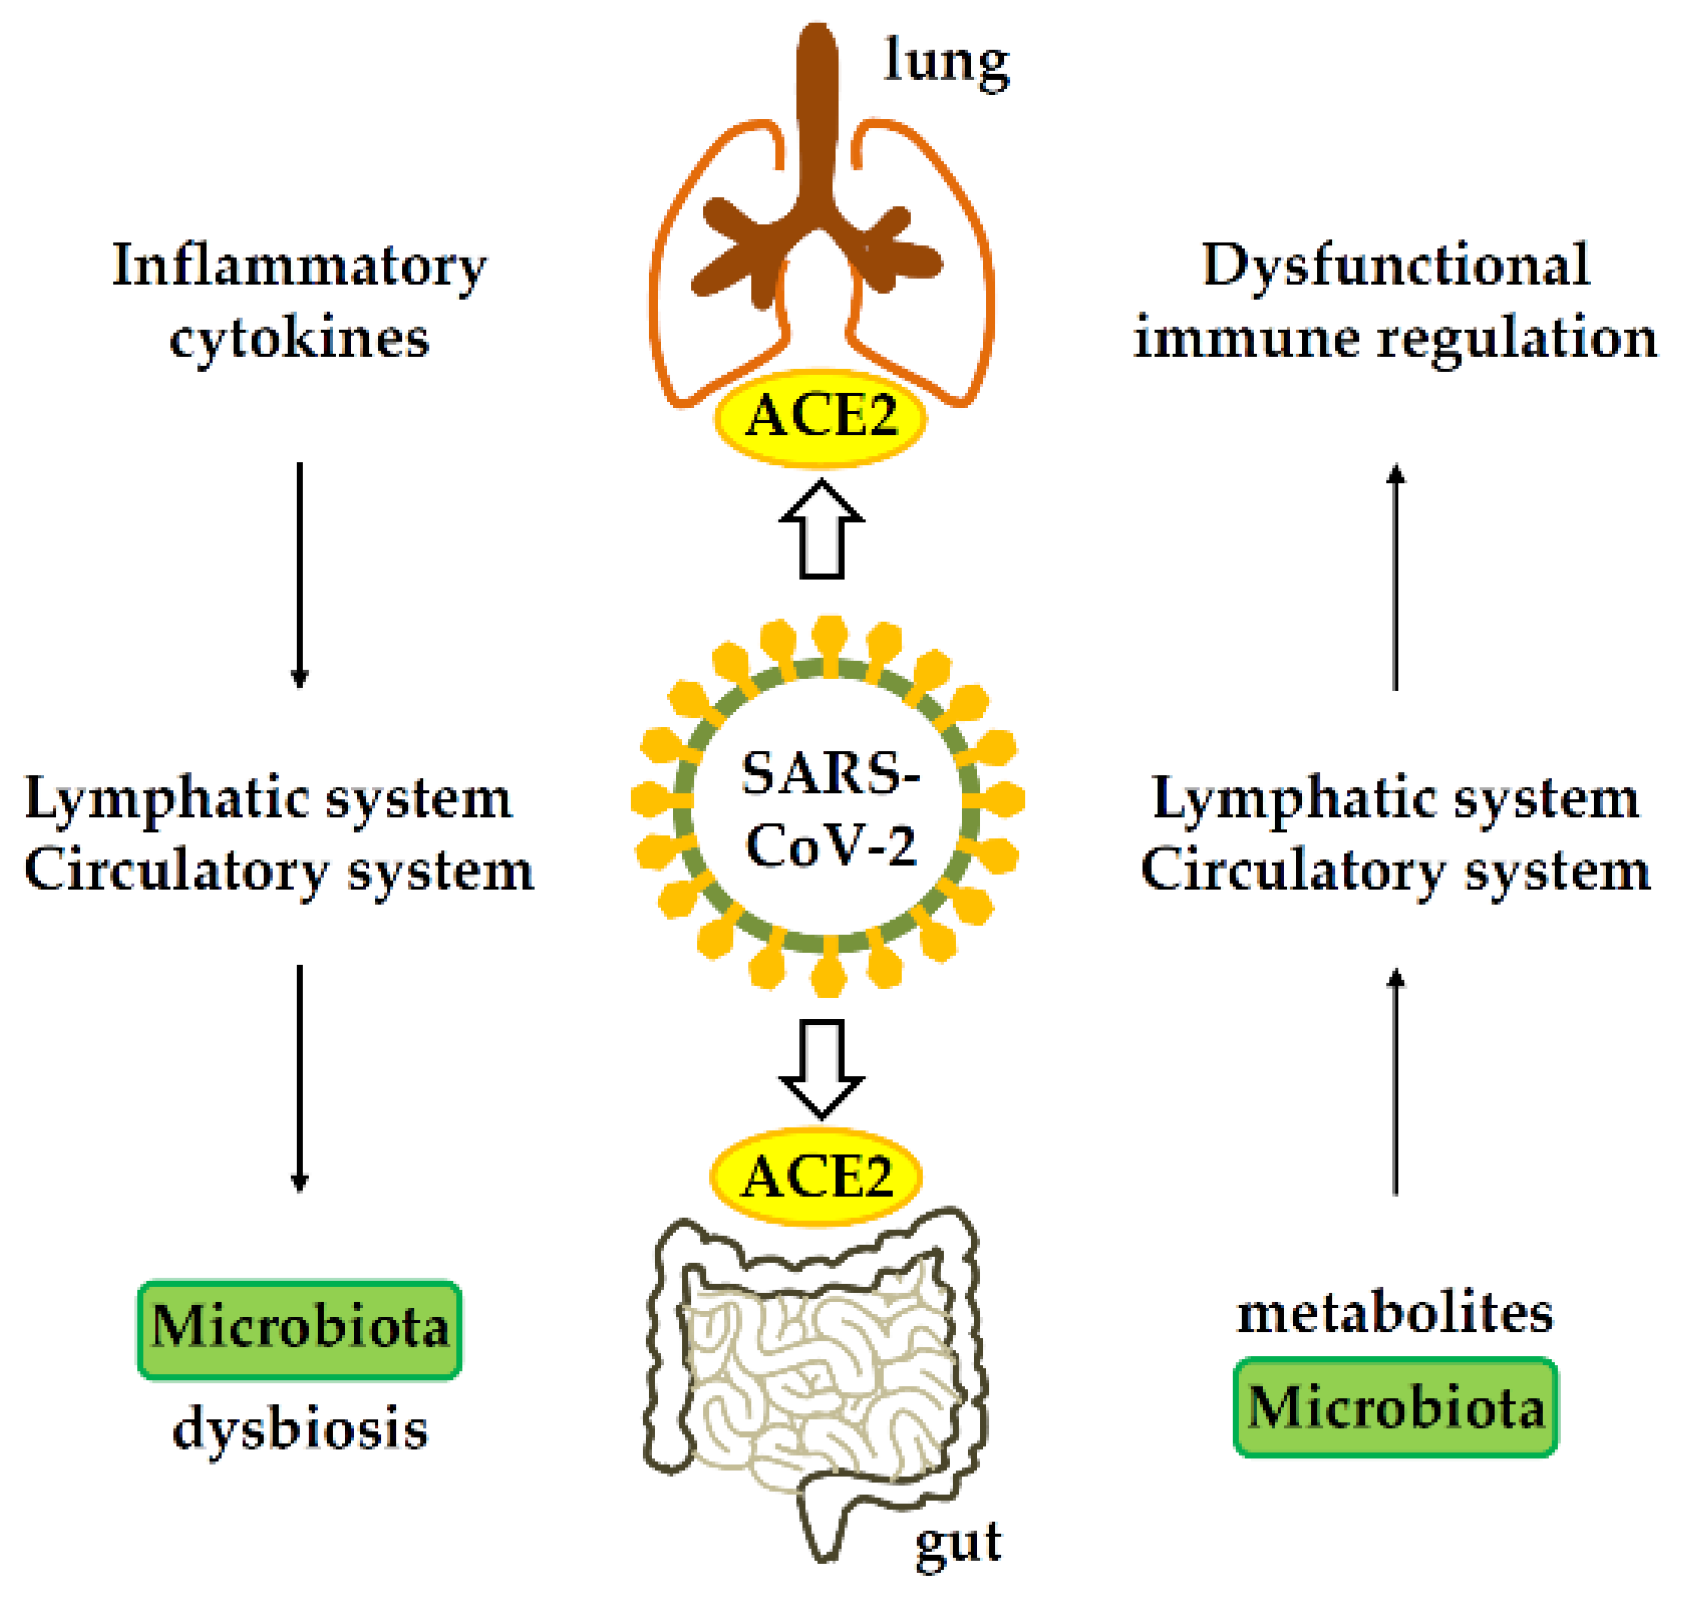 Gastrointestinal-lung axis in COVID-19. ACE2, angiotensin-converting enzyme 2.